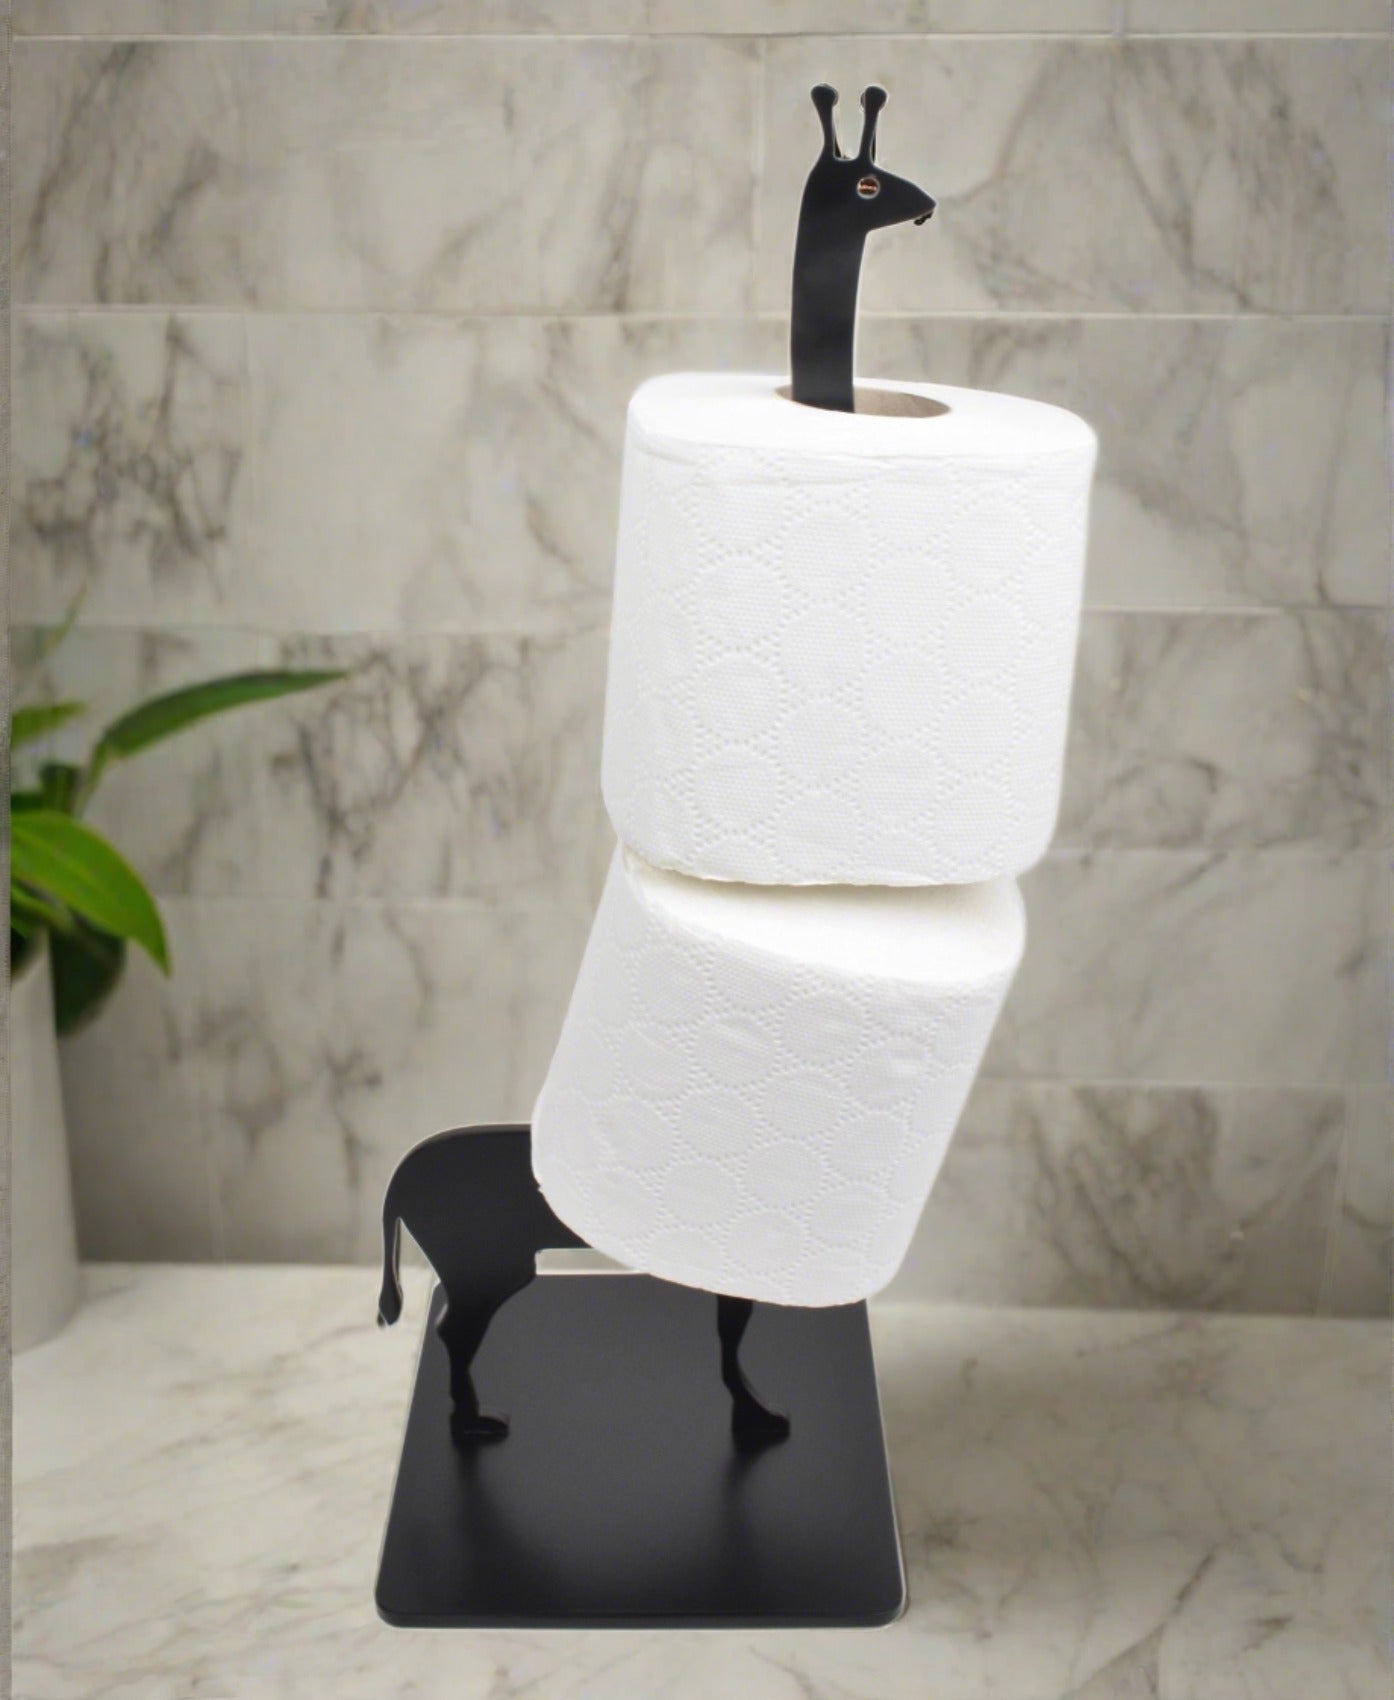 Okunaii Quirky Creature Toilet Roll Holder - Indoor Outdoors